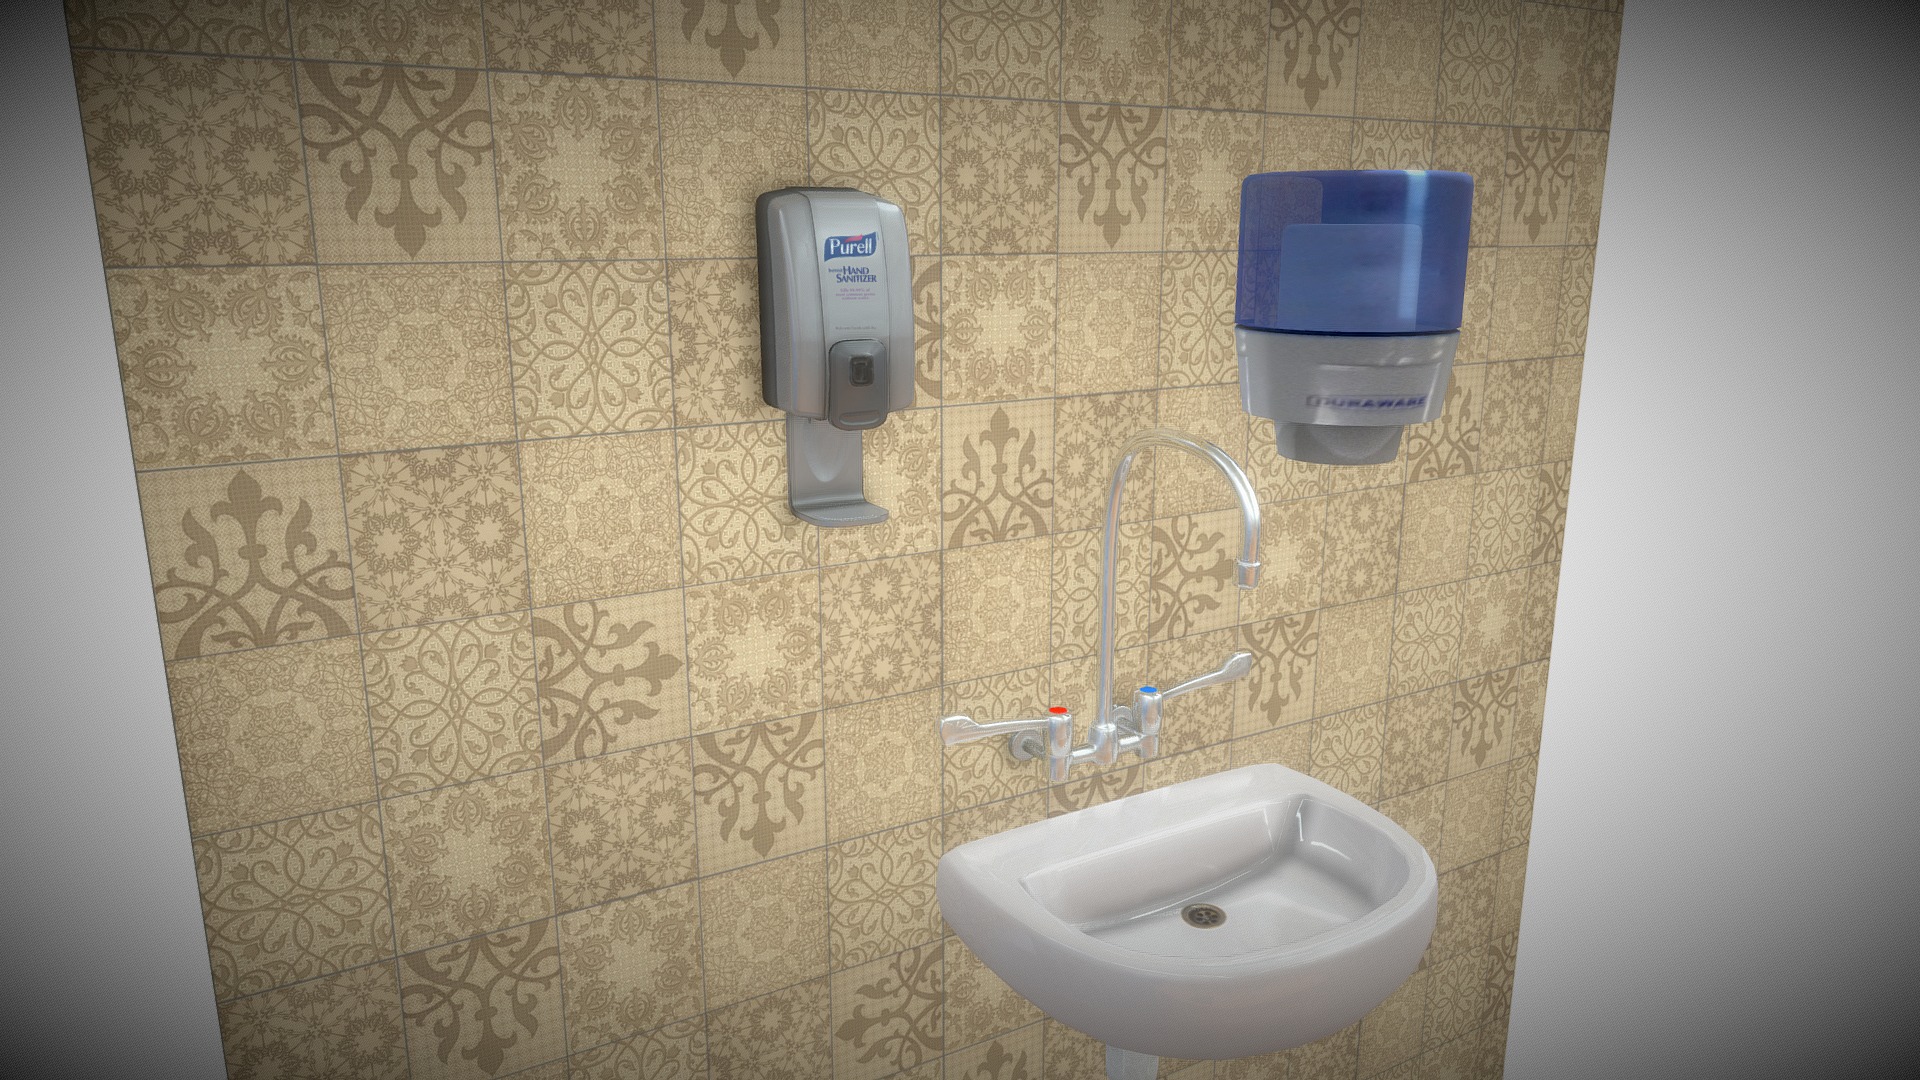 3D model purell hand Sanitizer full with basin - This is a 3D model of the purell hand Sanitizer full with basin. The 3D model is about a bathroom with a sink and a toilet.